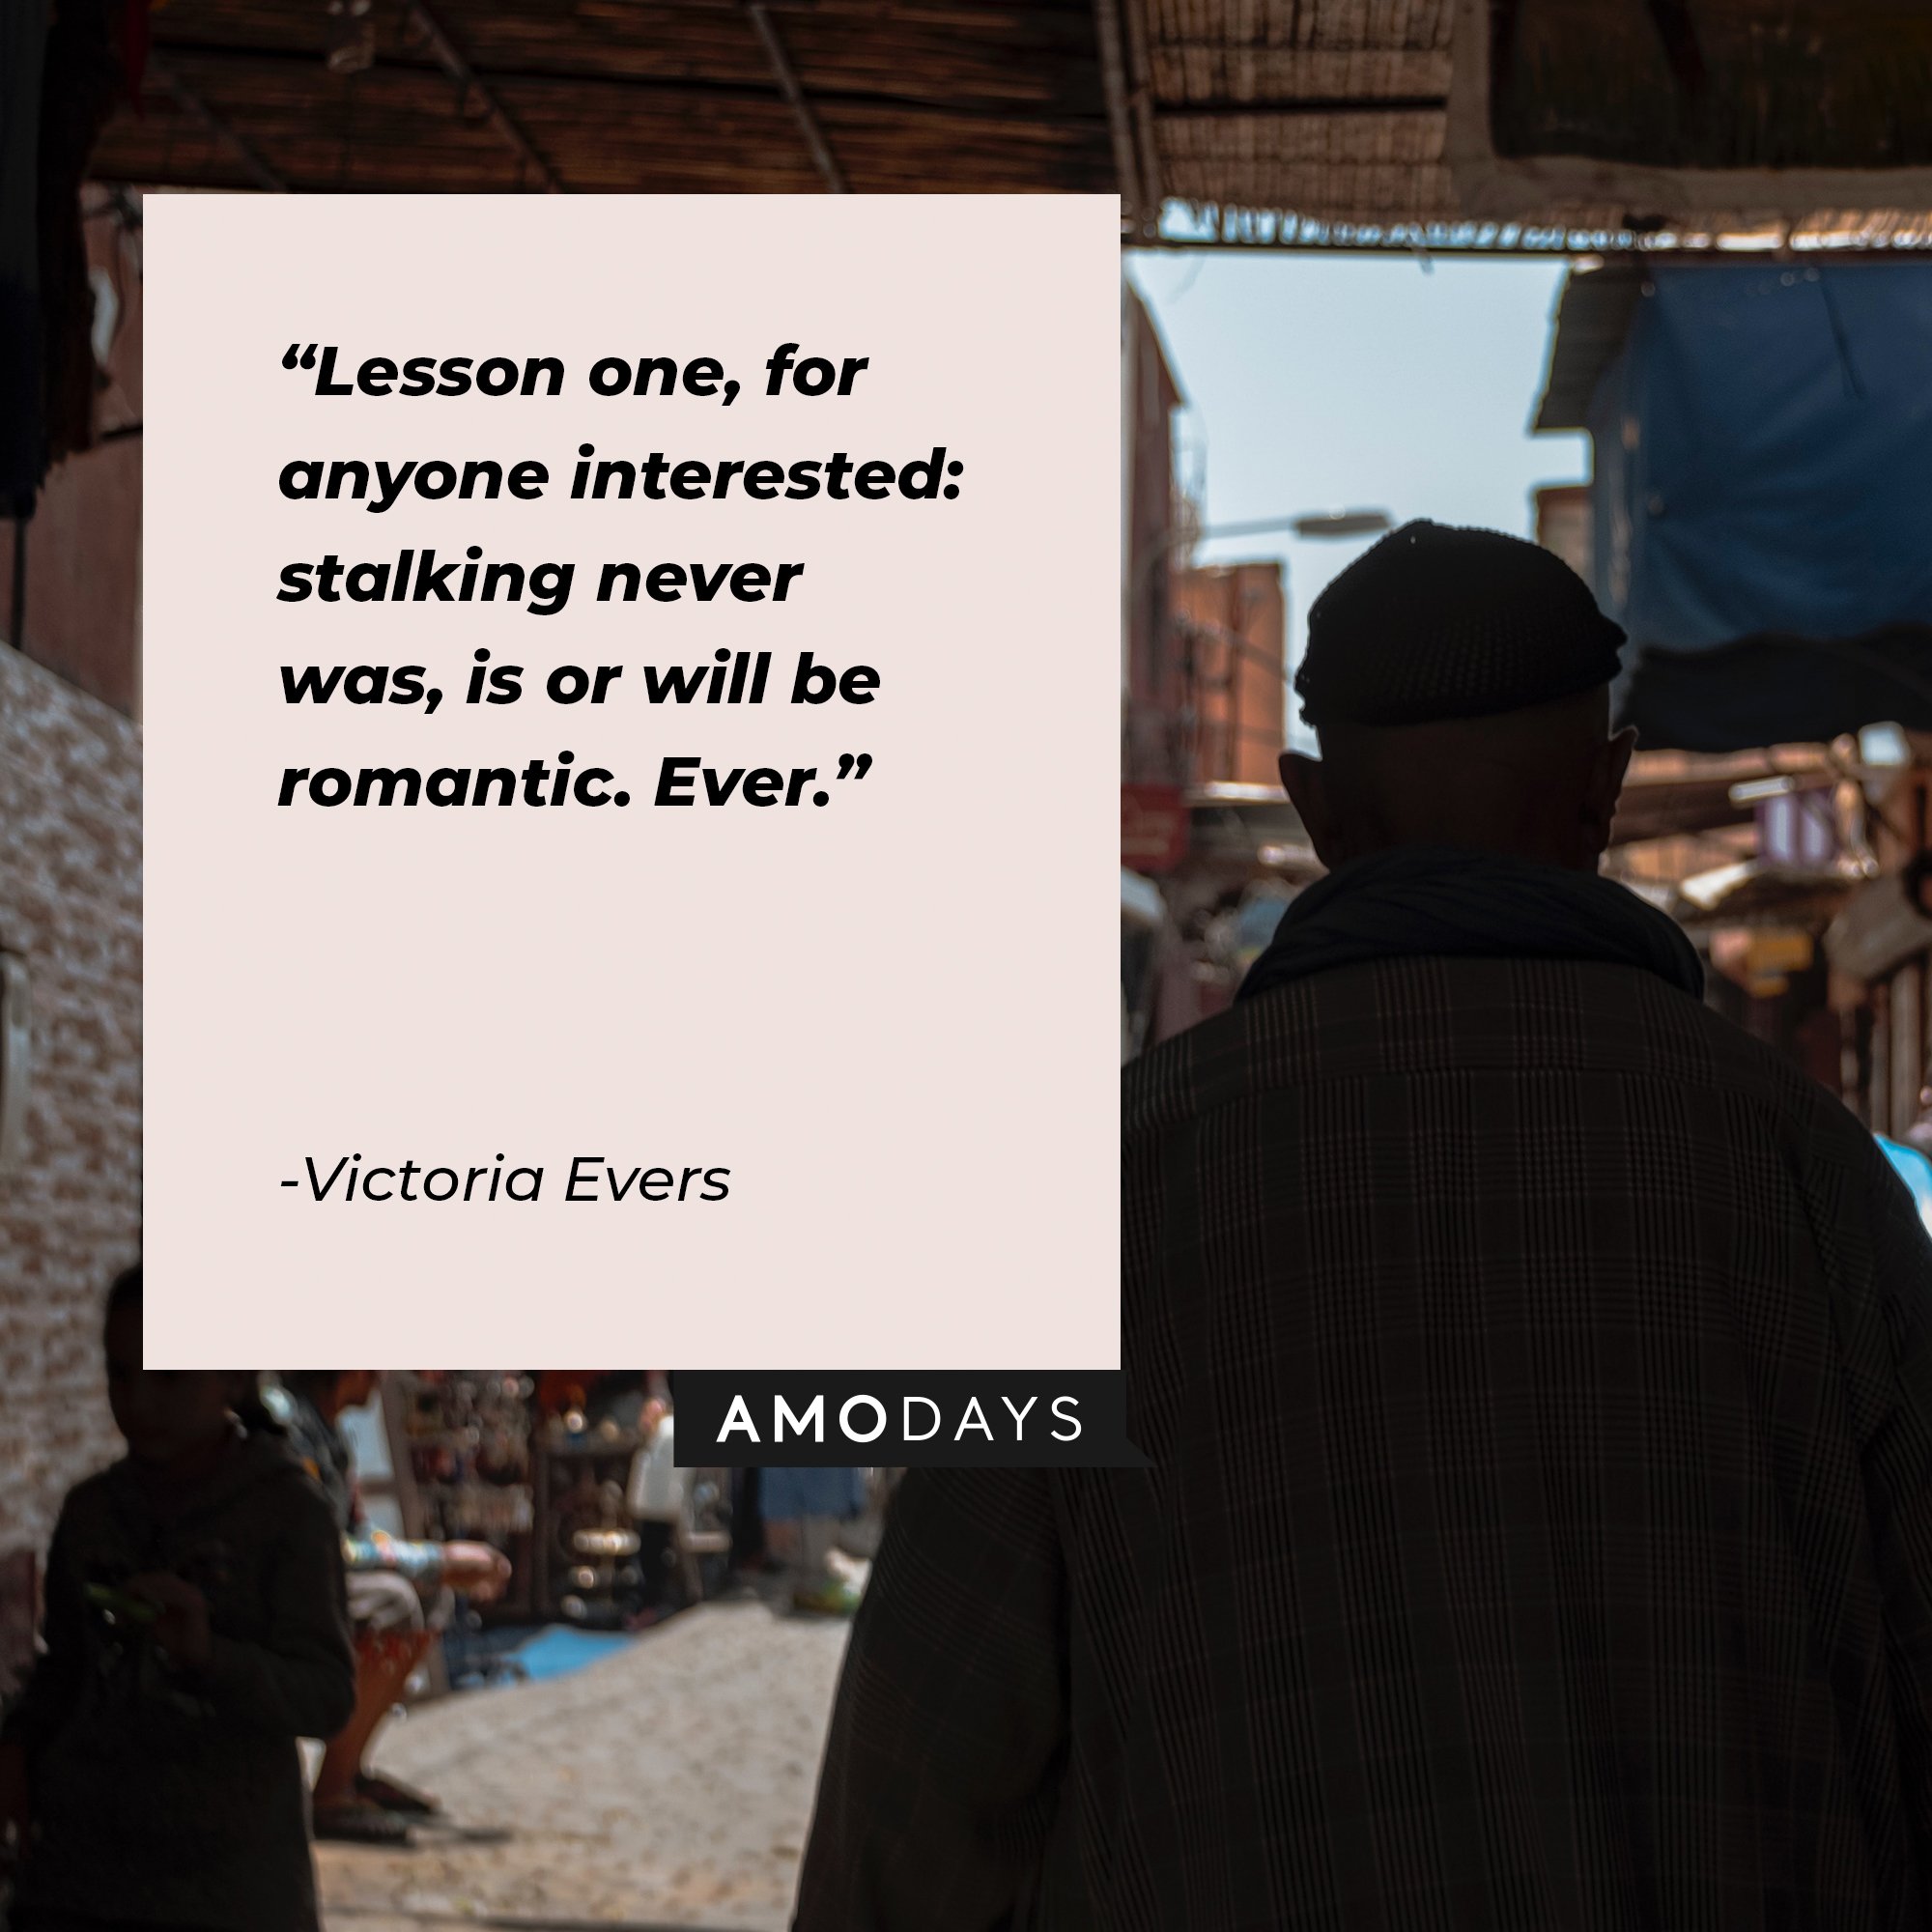 Victoria Evers’s quote: "Lesson one, for anyone interested: stalking never was, is or will be romantic. Ever." | Image: AmoDays 